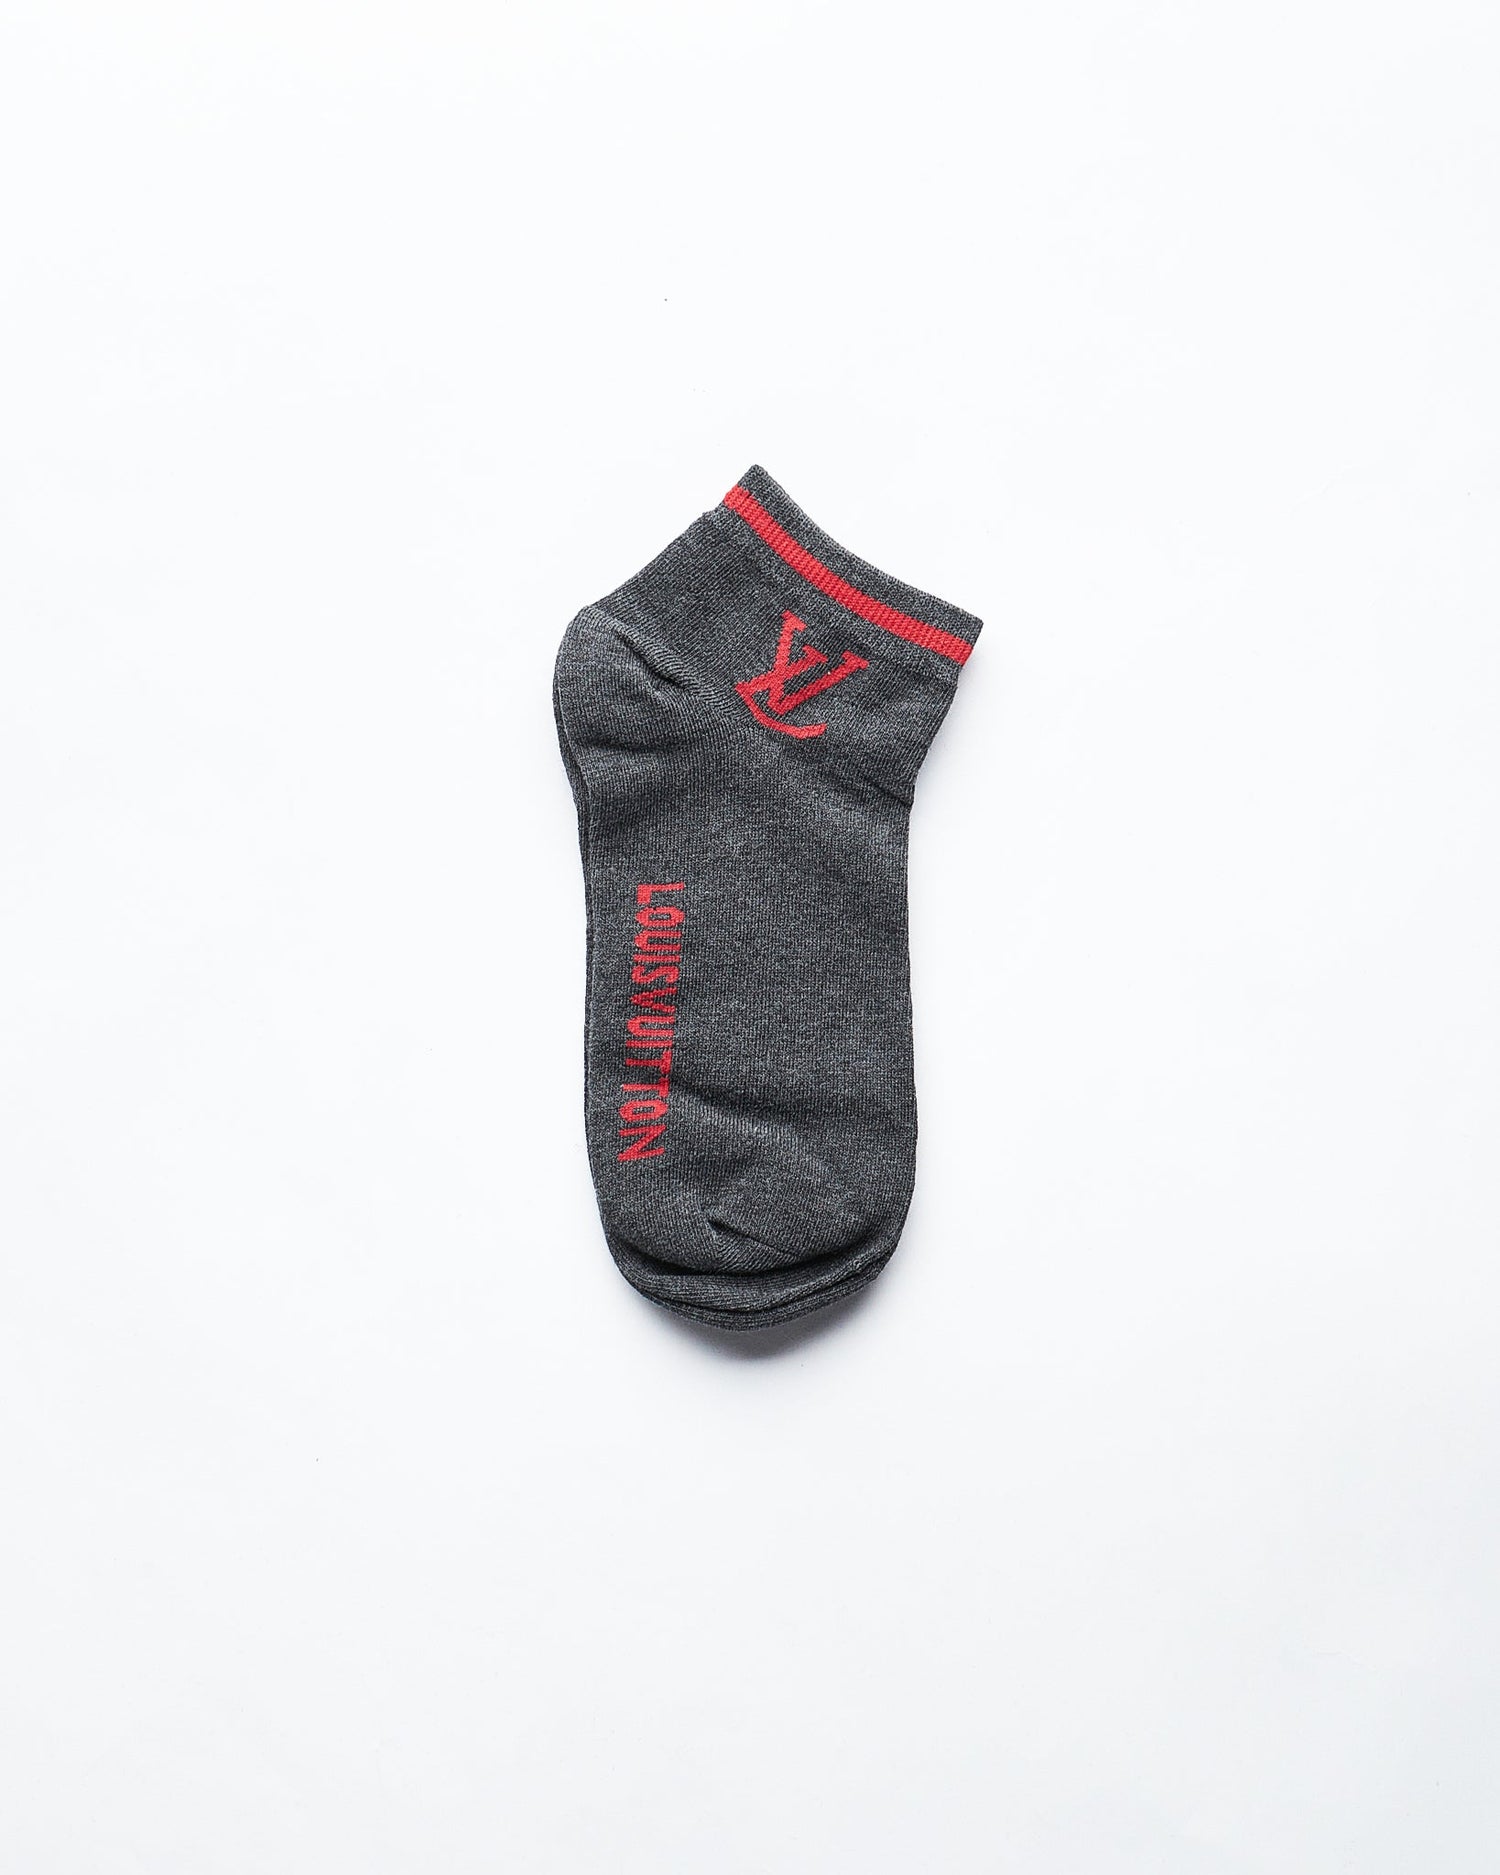 MOI OUTFIT-LV 5 Pairs Low Cut Socks 13.90